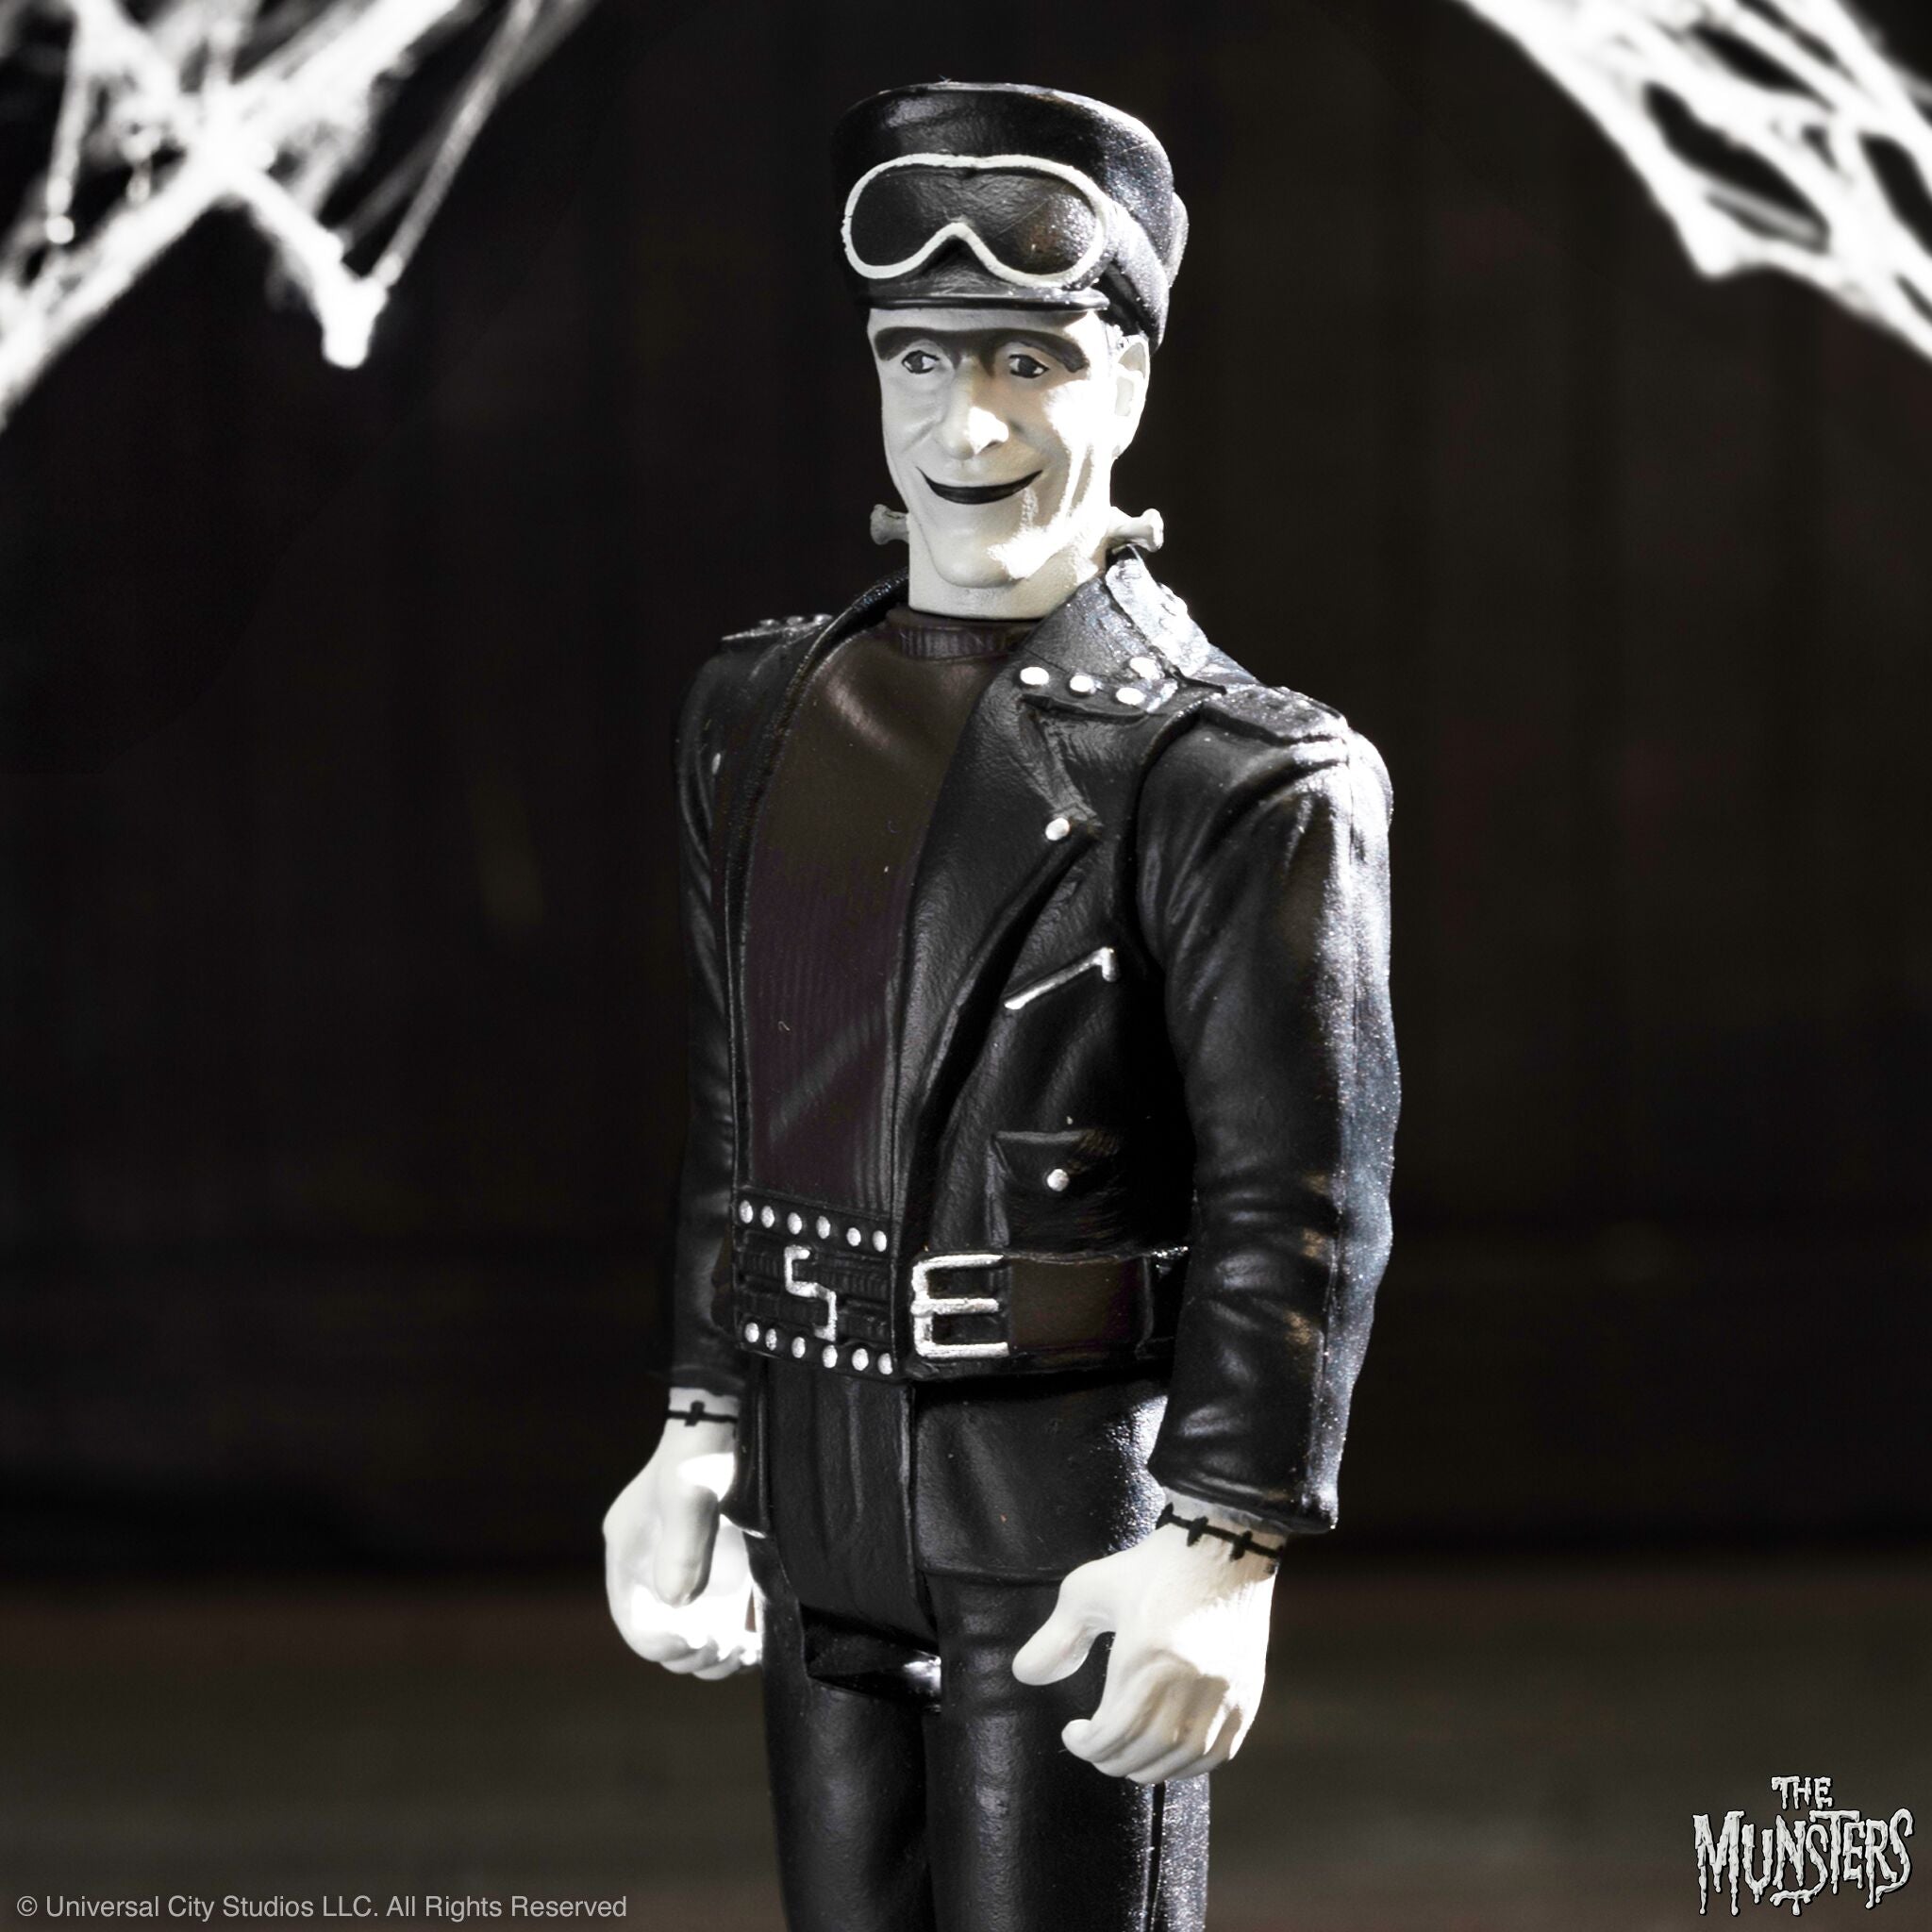 The Munsters ReAction Wave 3 - Hot Rod Herman (Grayscale)